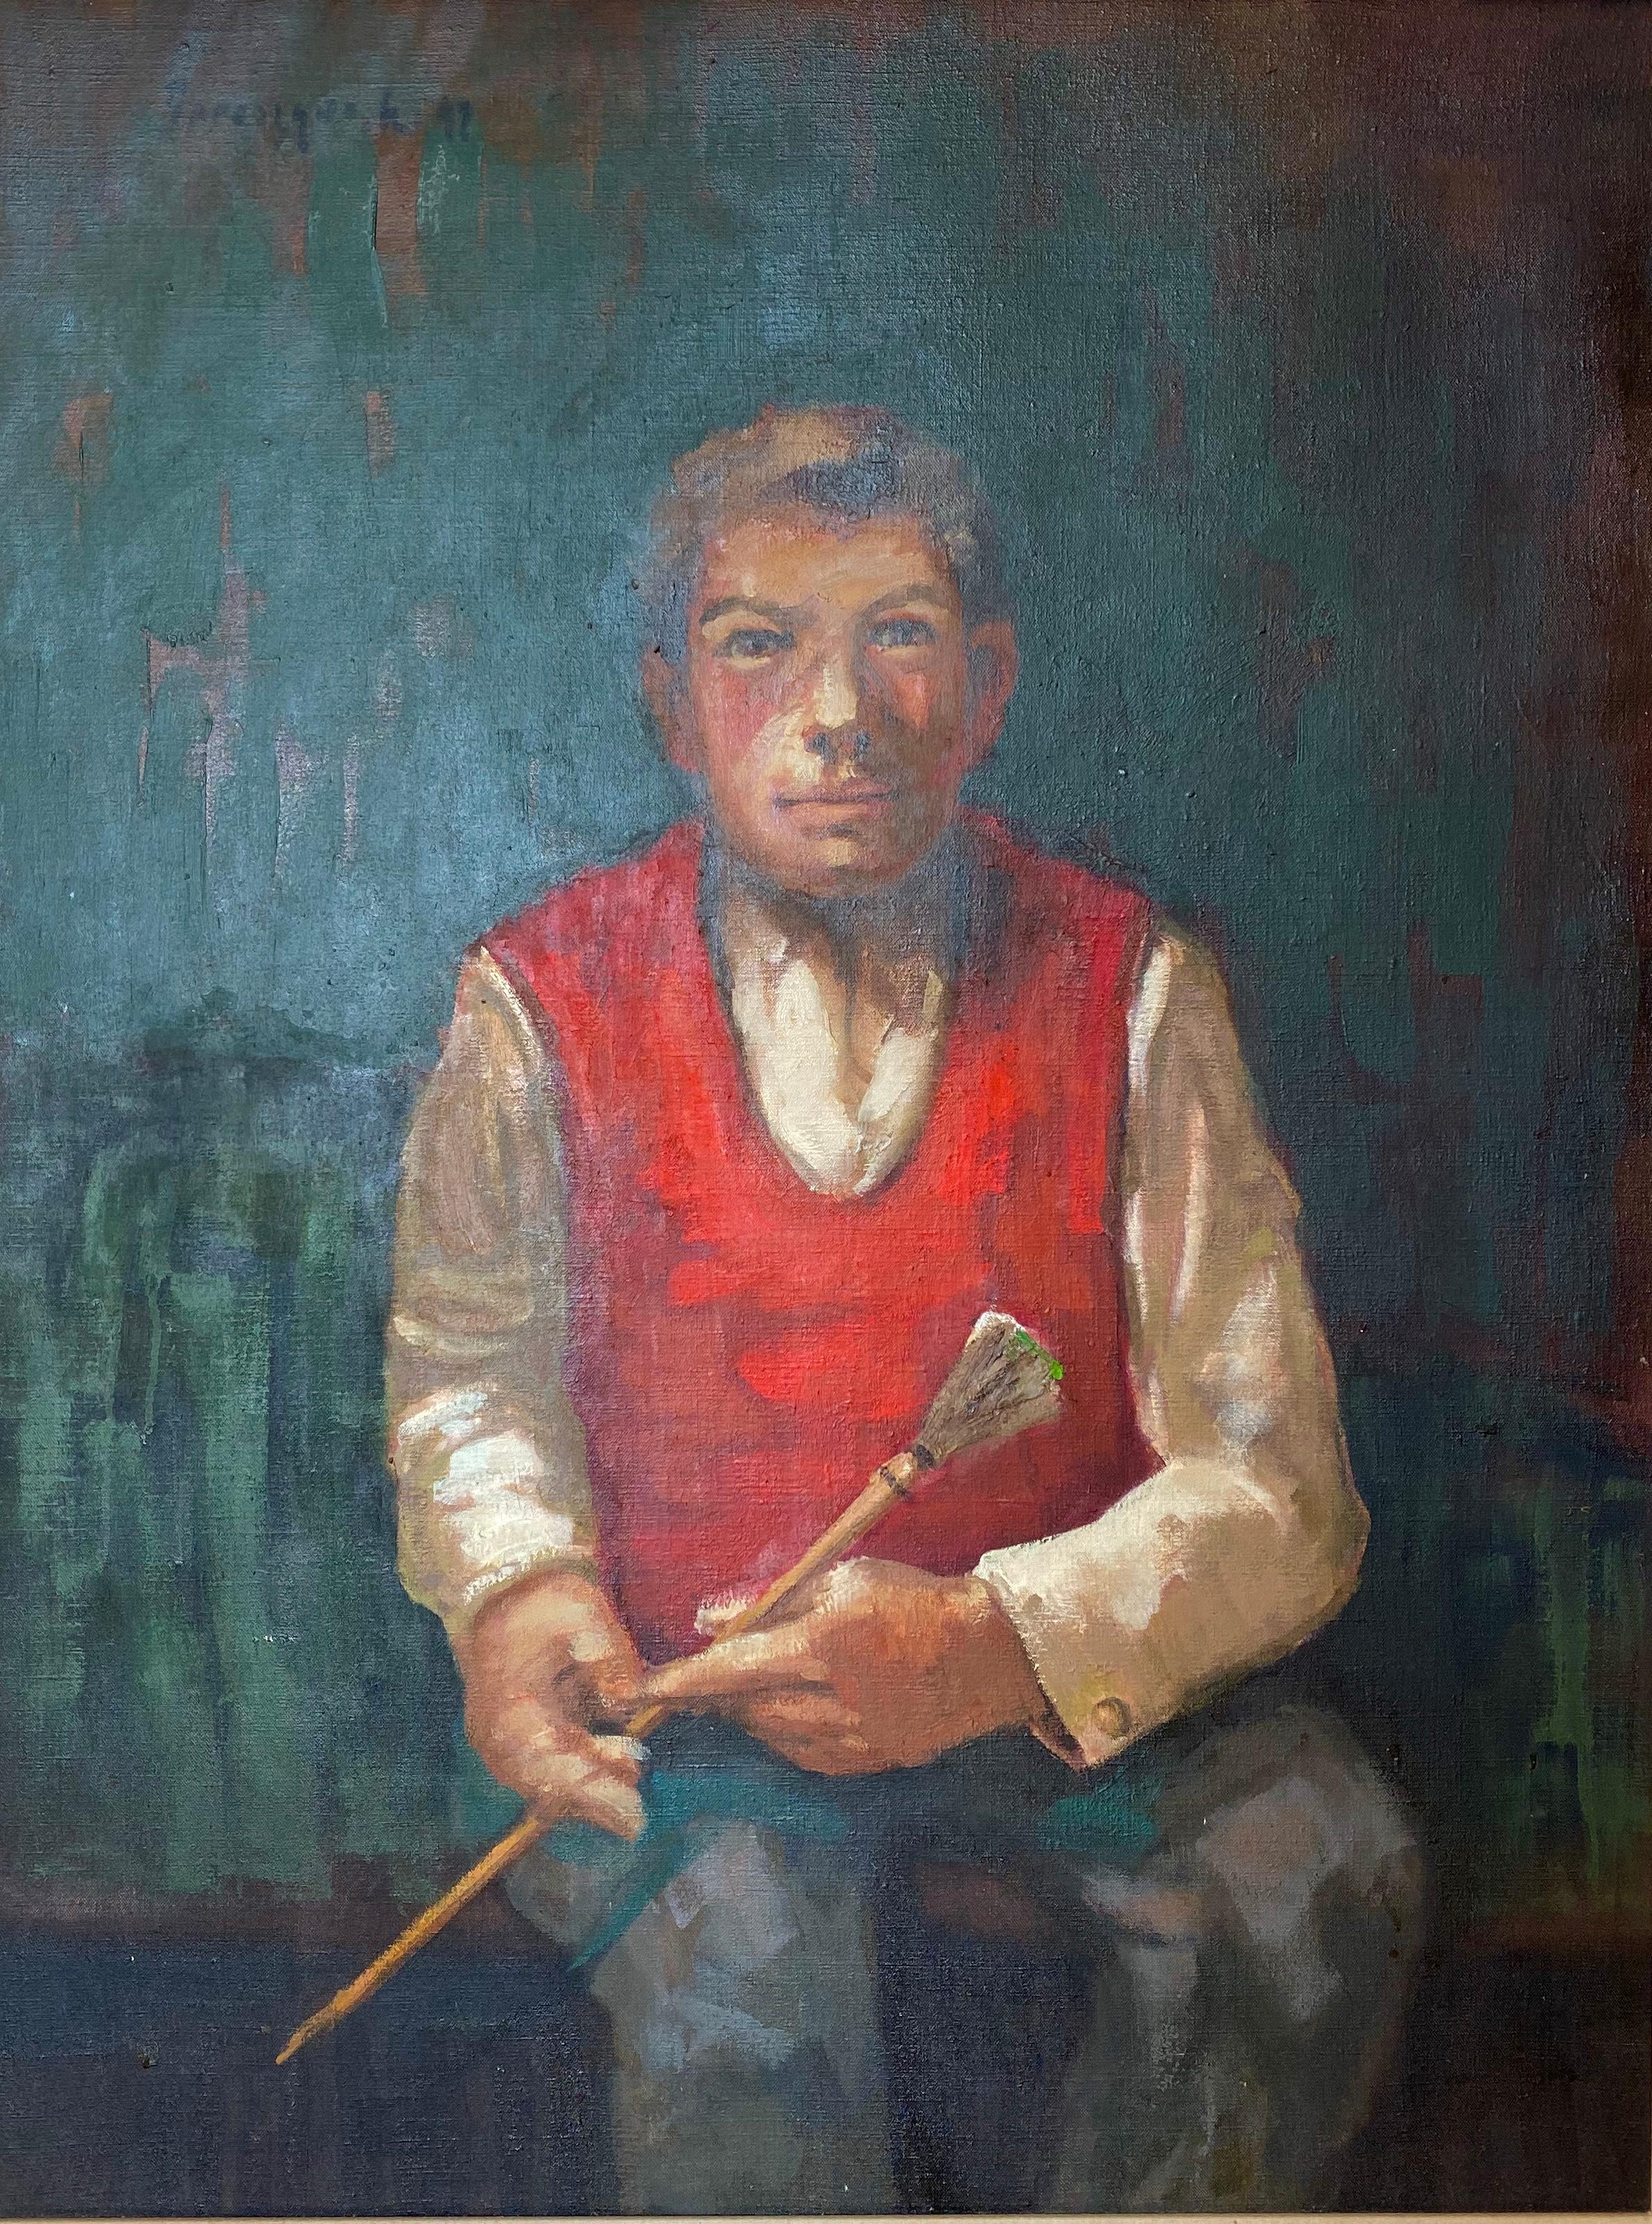 Tadeusz Jaroszynski Figurative Painting - Adam, Oil on Canvas, Signed and Dated '91, 20th Centuary, Portrait, (framed) 